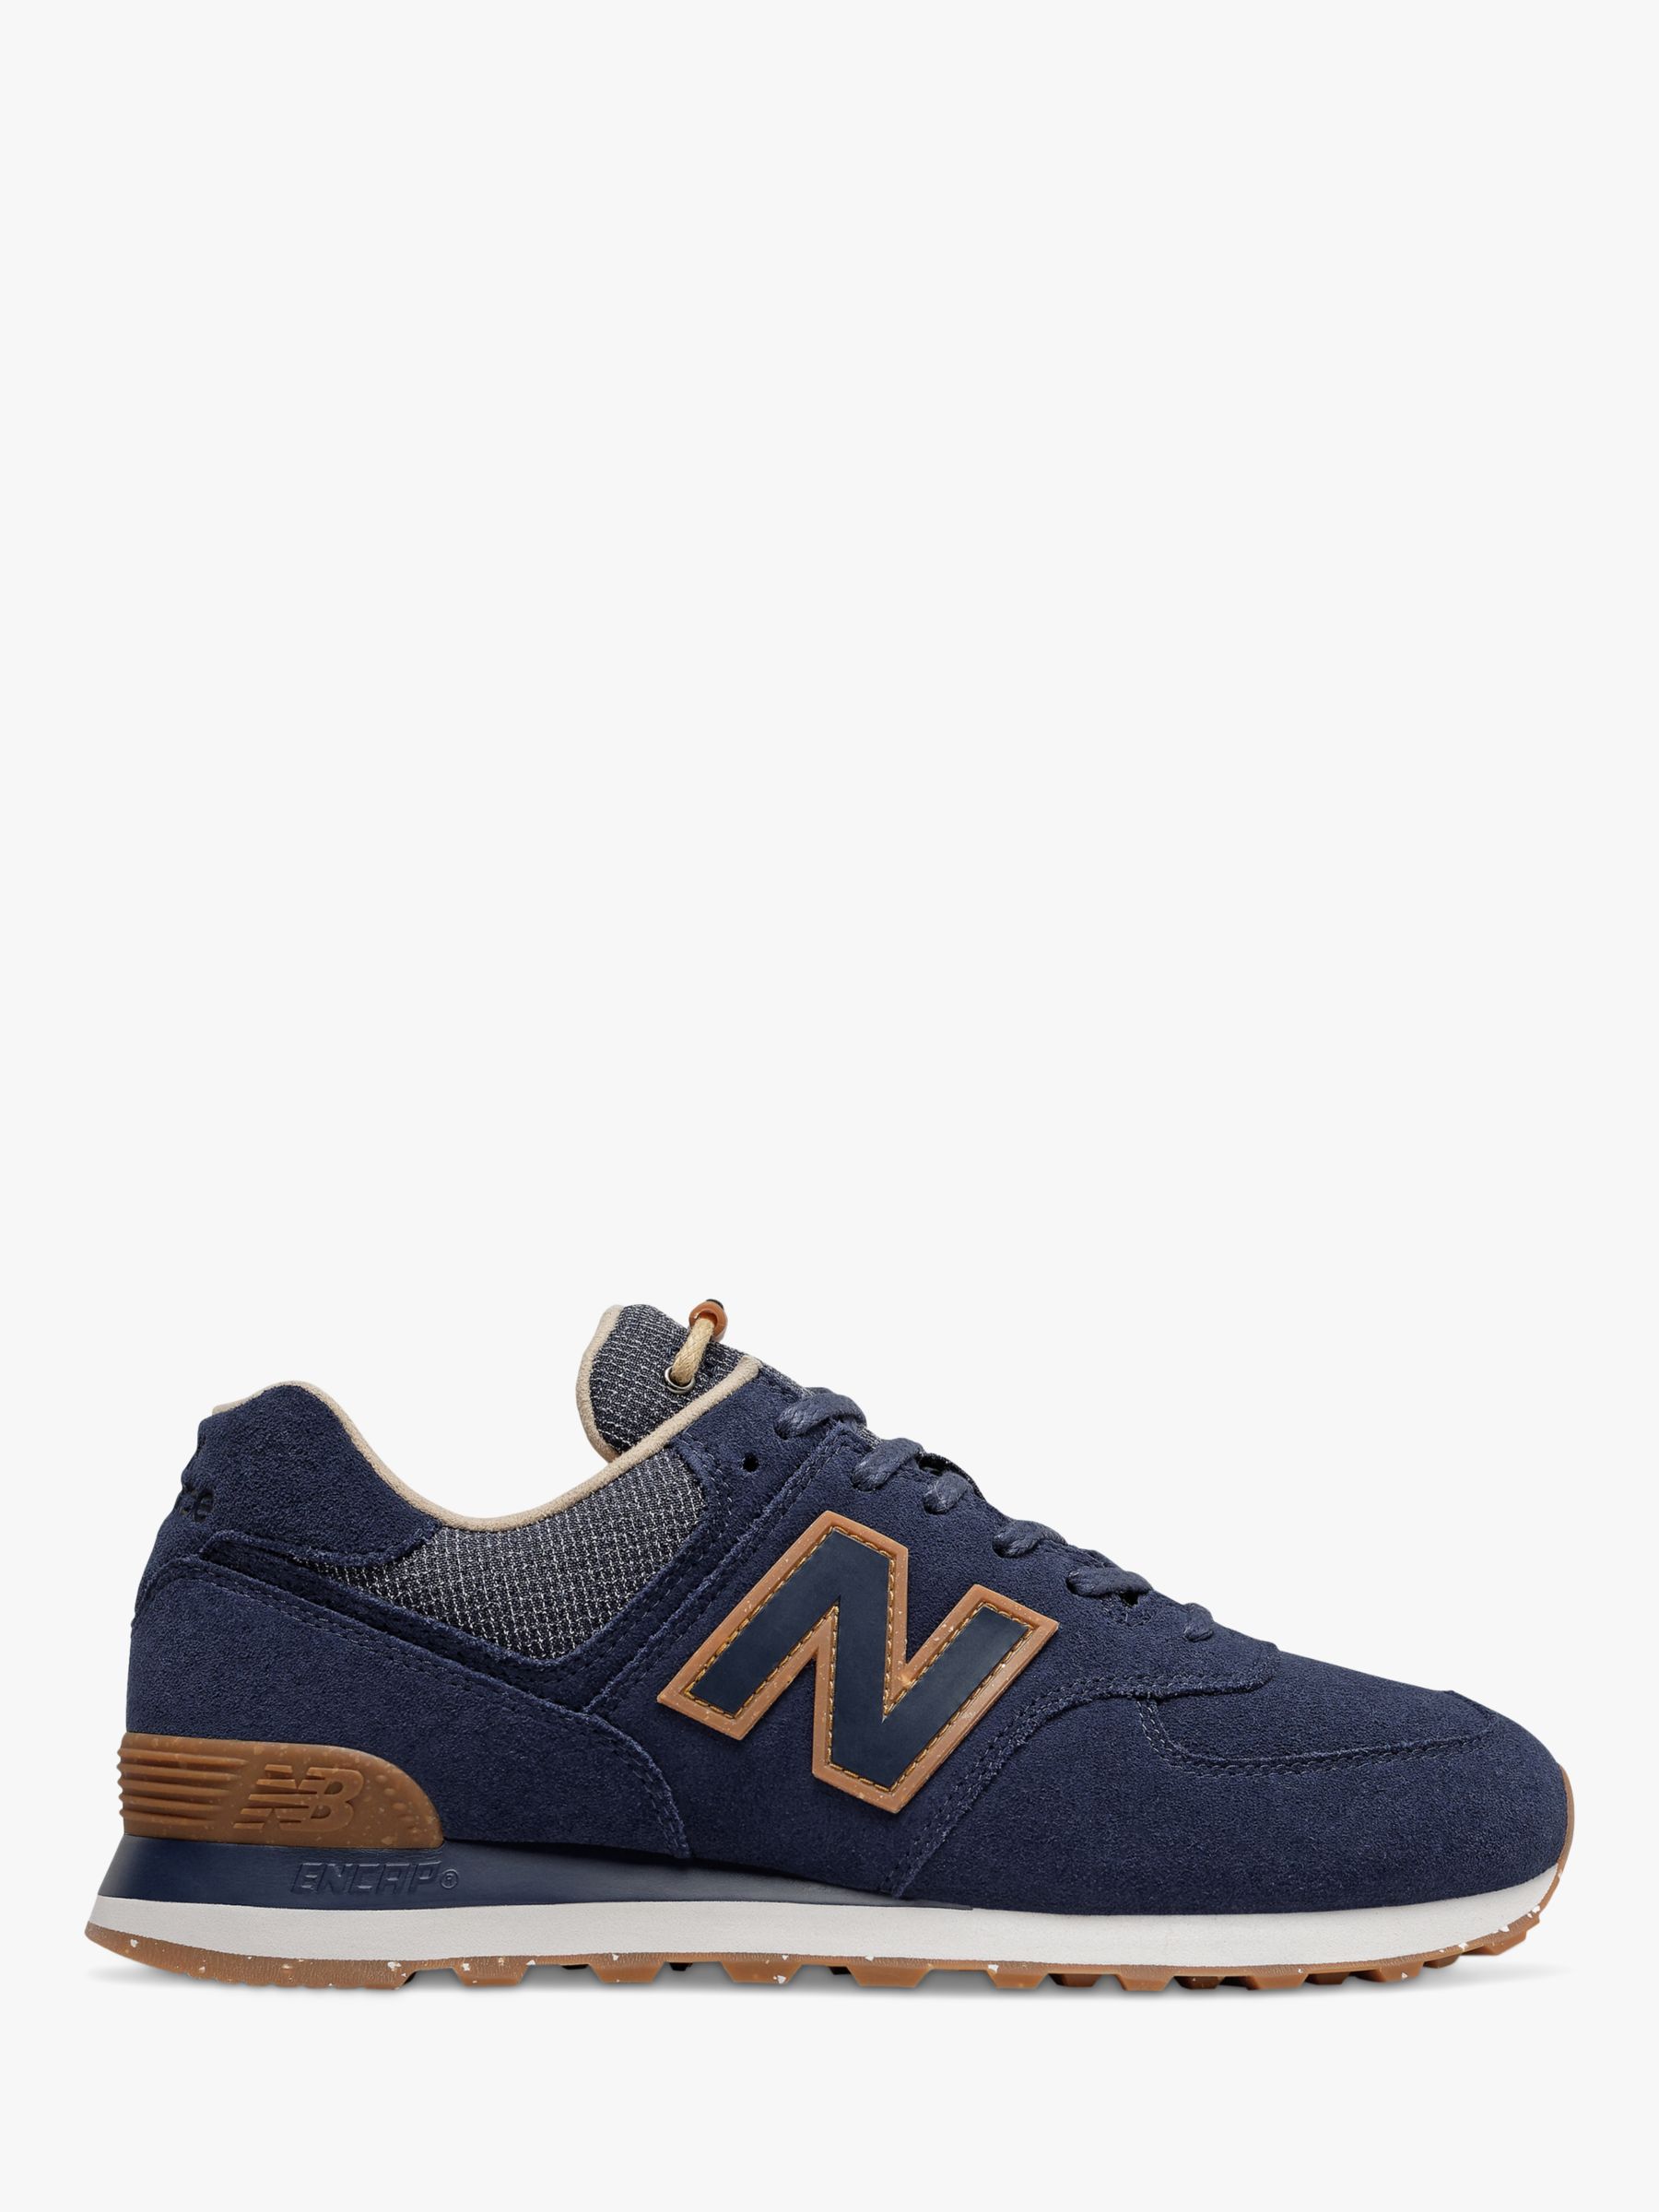 New Balance 574 Suede Trainers, Blue/Brown, 7